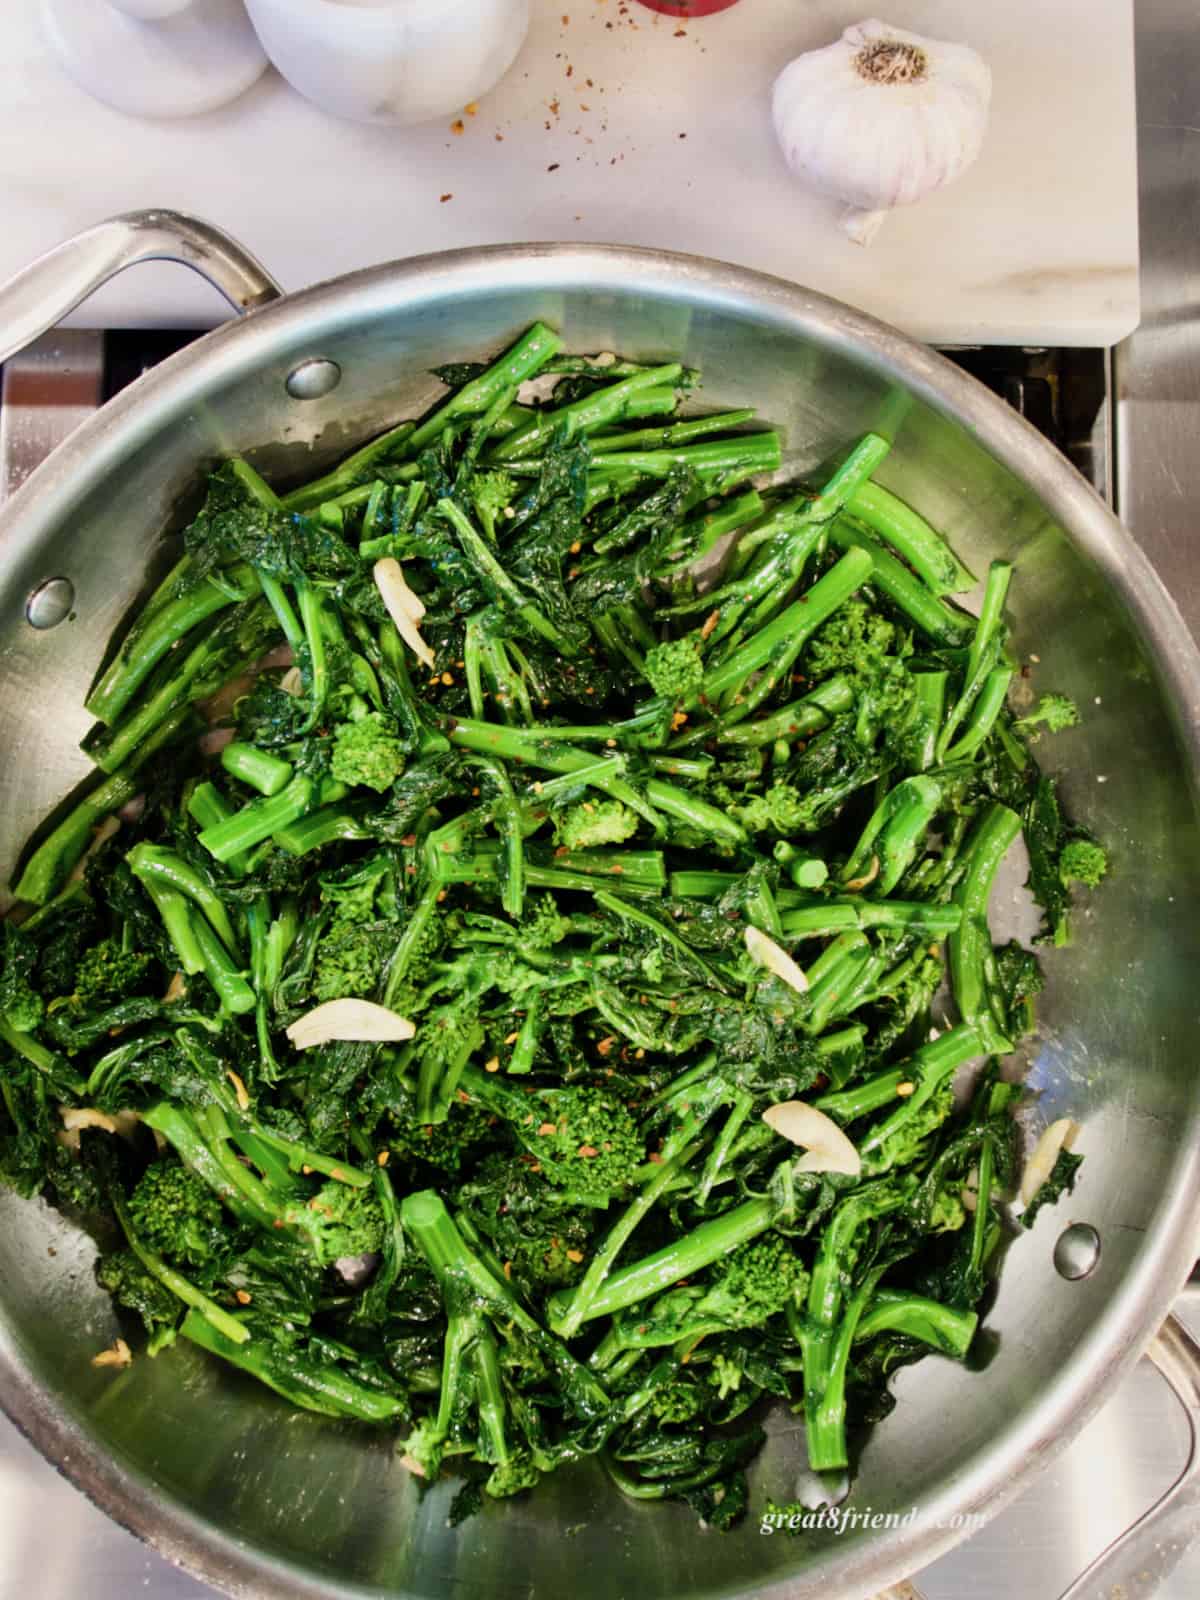 Overhead shot of cooked broccoli rabe in a stainless steel pan with slices of garlic and a head of garlic next to the pan.